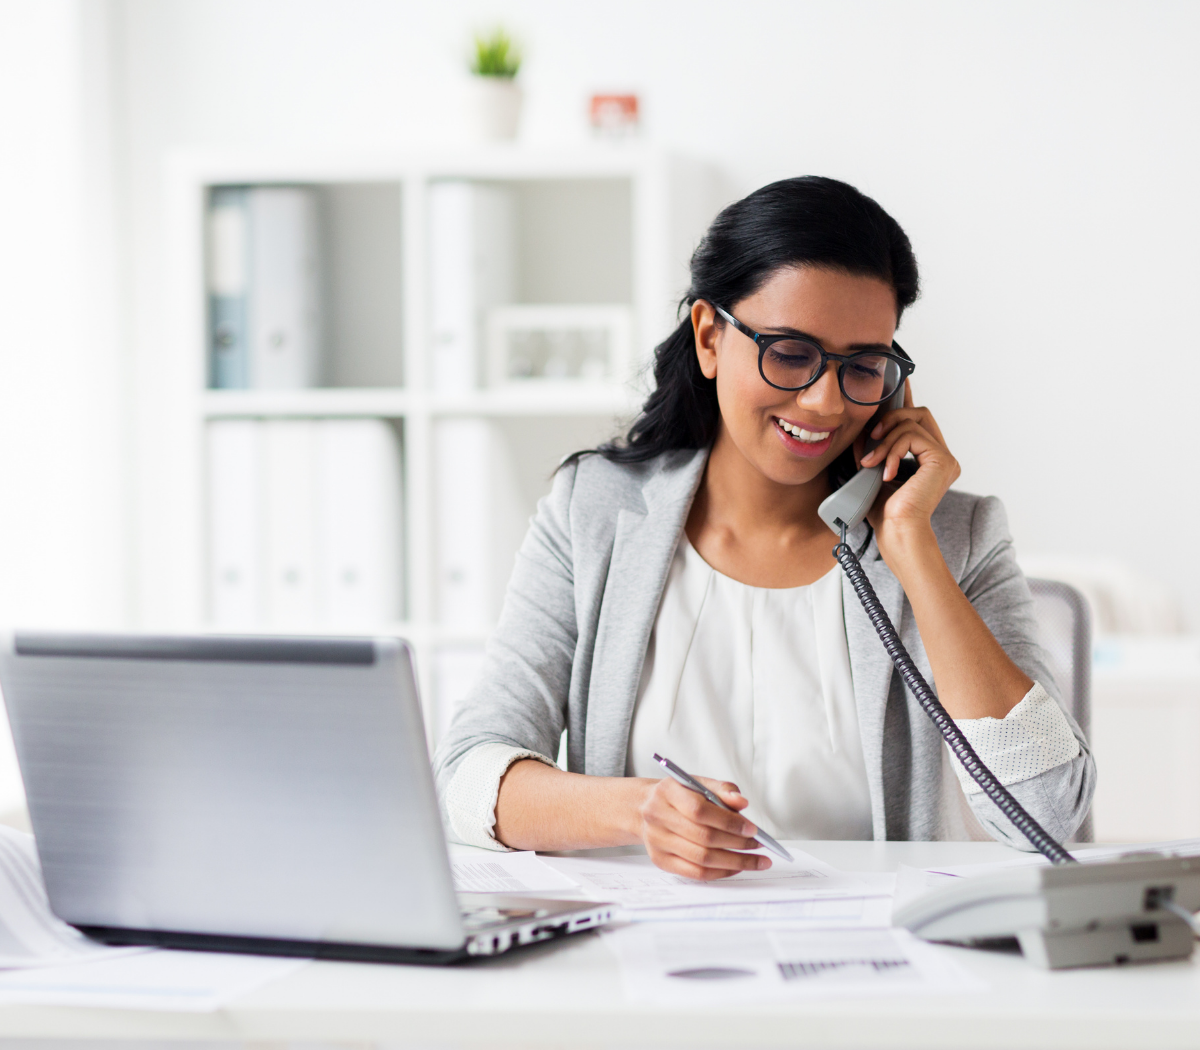 VoIP vs Landline Phones: Which is Better for Small Businesses